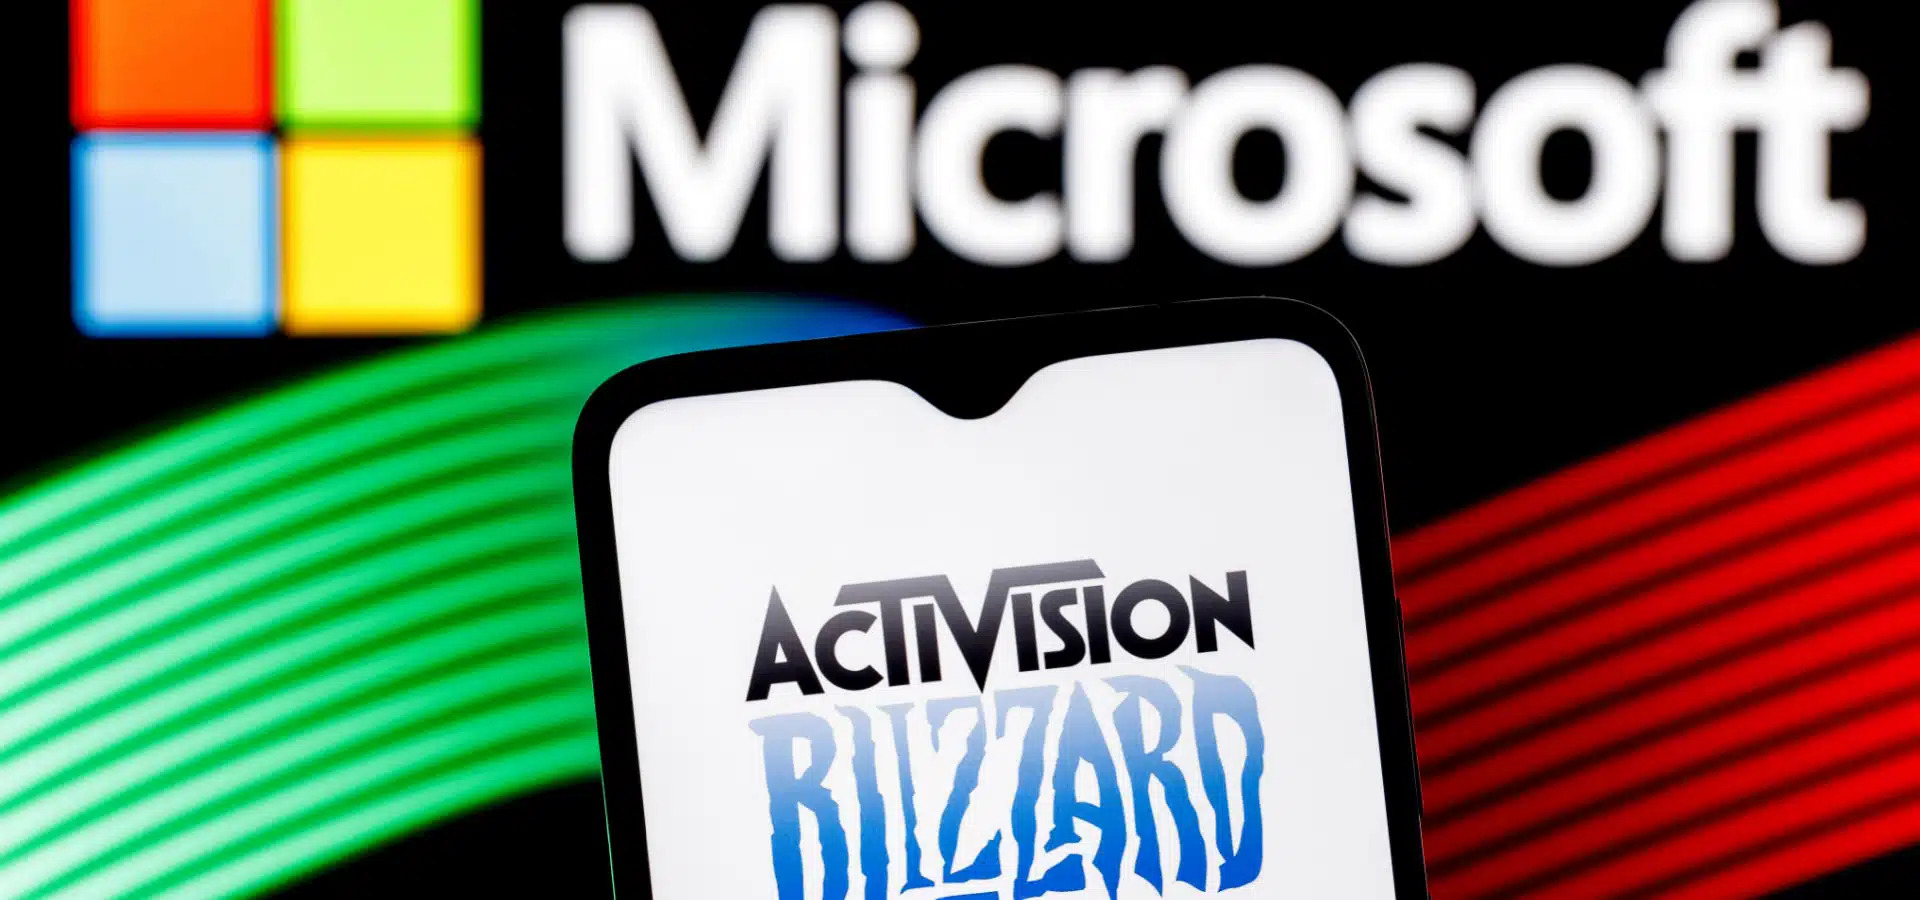  European Commission clears merger proposal of Microsoft and Activision Blizzard